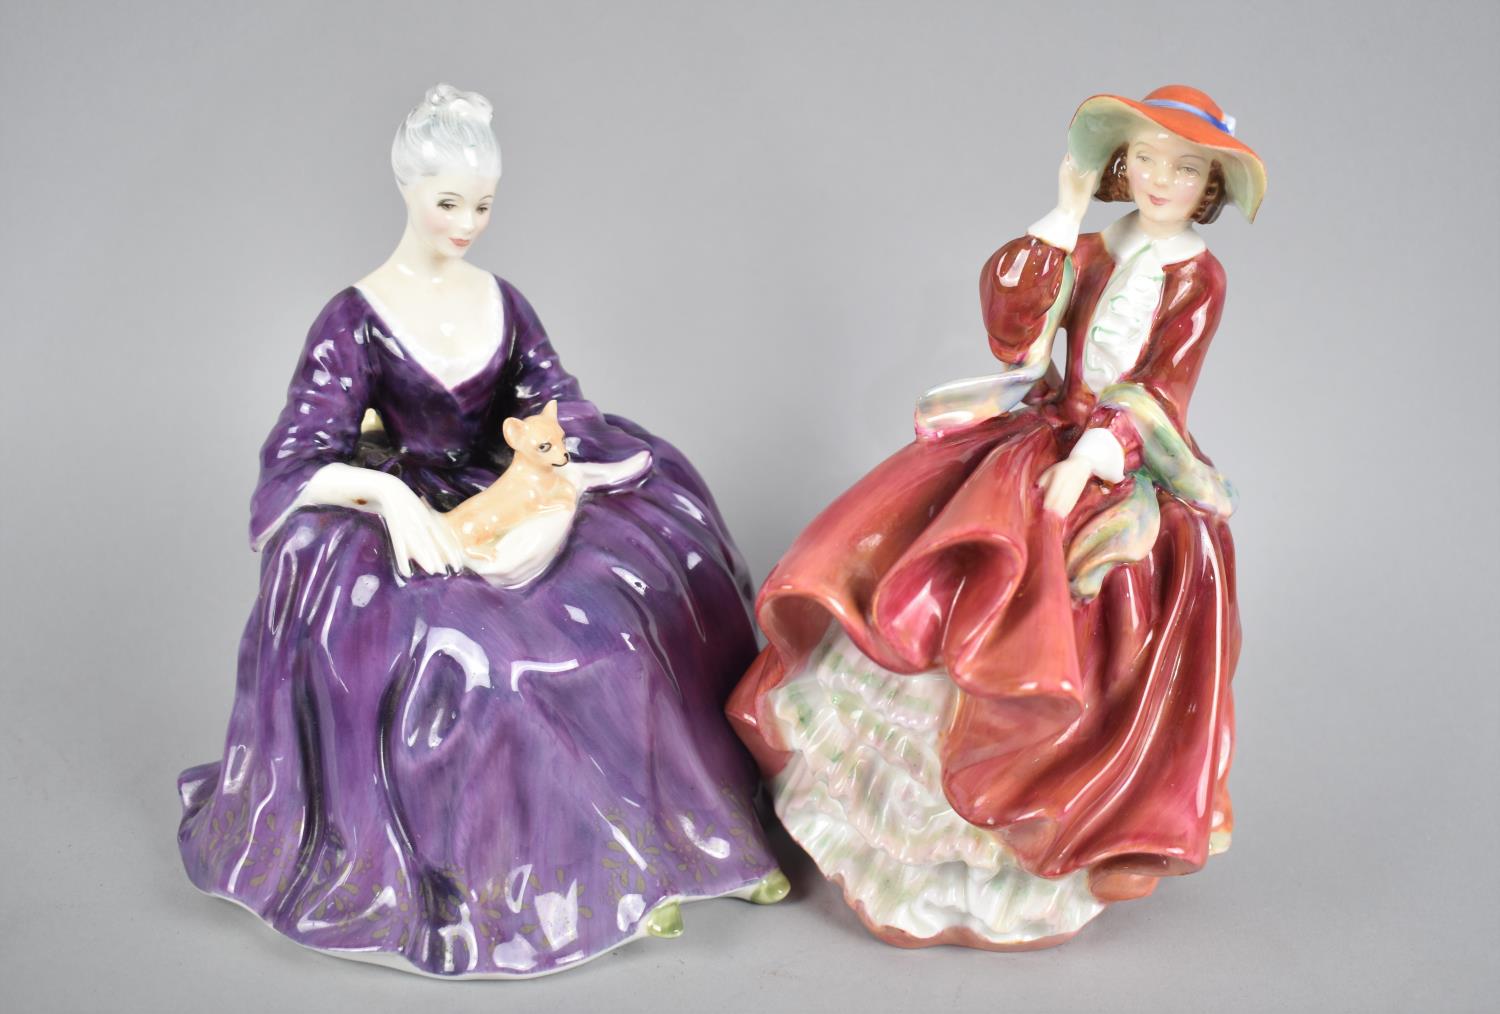 Two Royal Doulton Figures, Top O' The Hill and Charlotte